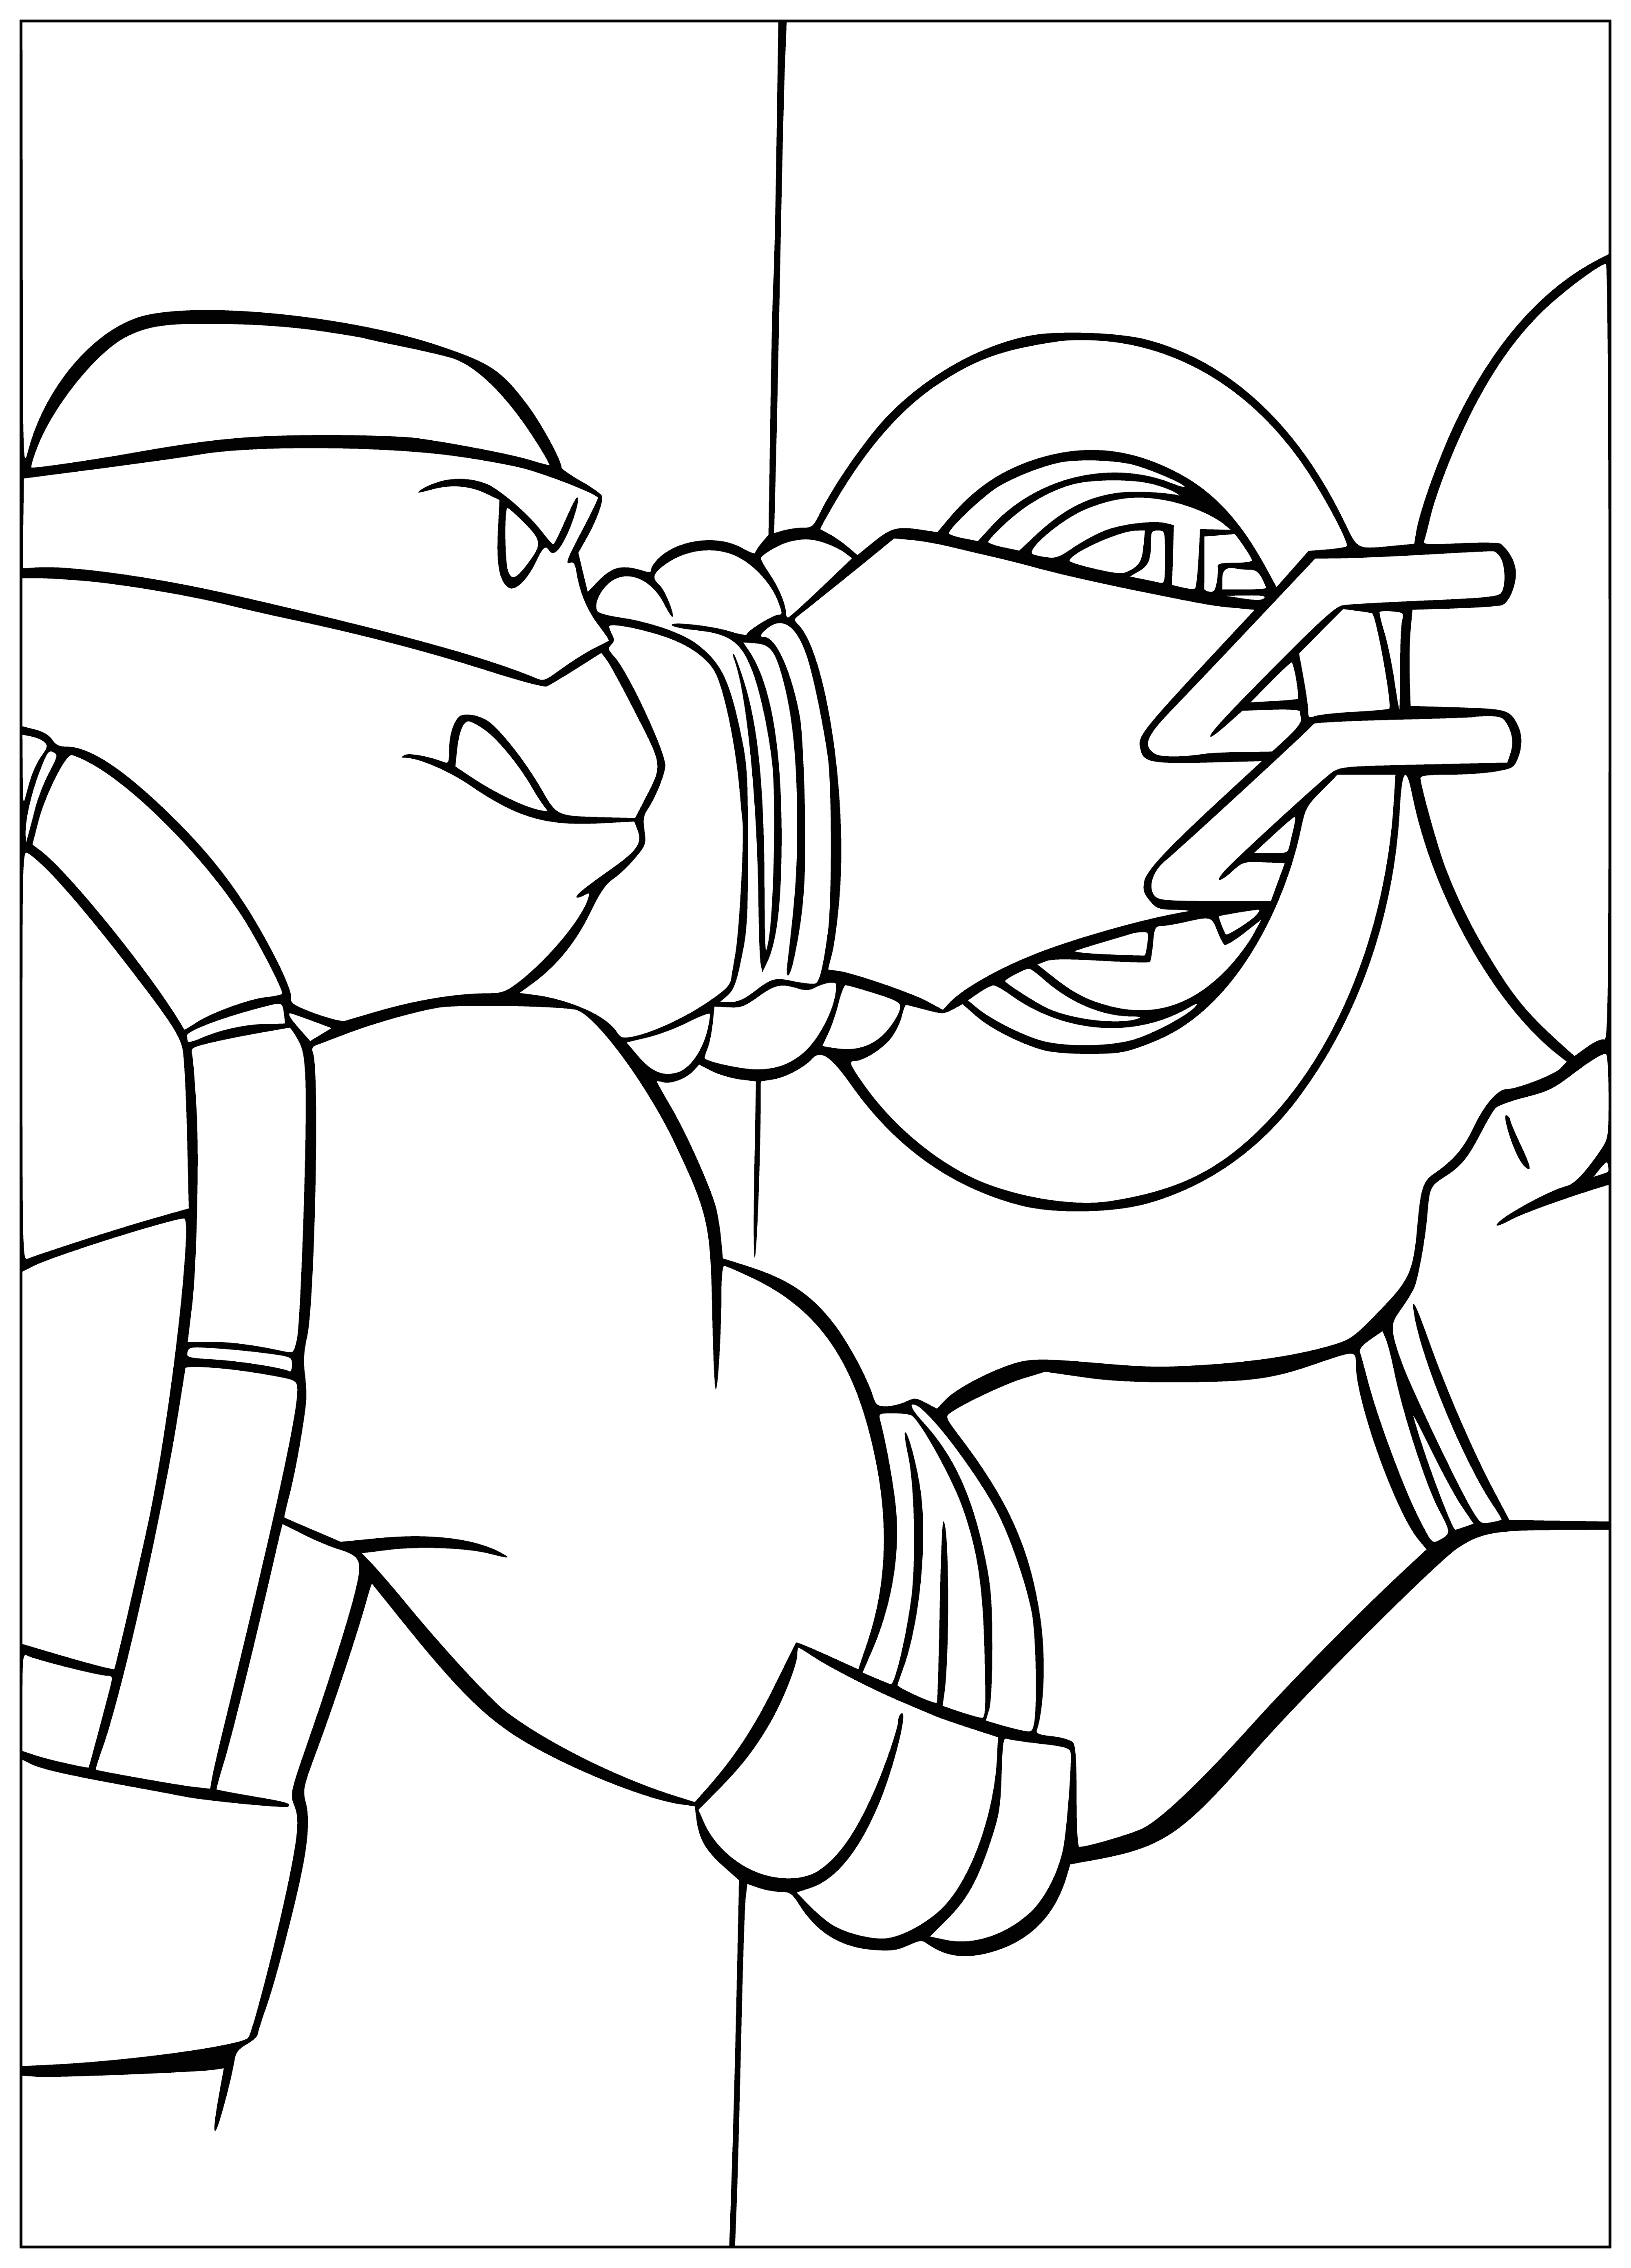 coloring page: Three turtles wear masks, wield weapons & stand in cityscape; orange has blue mask, holds two katanas; blue has orange mask, holds a staff; green has brown shell, wears red mask, katanas crossed behind.